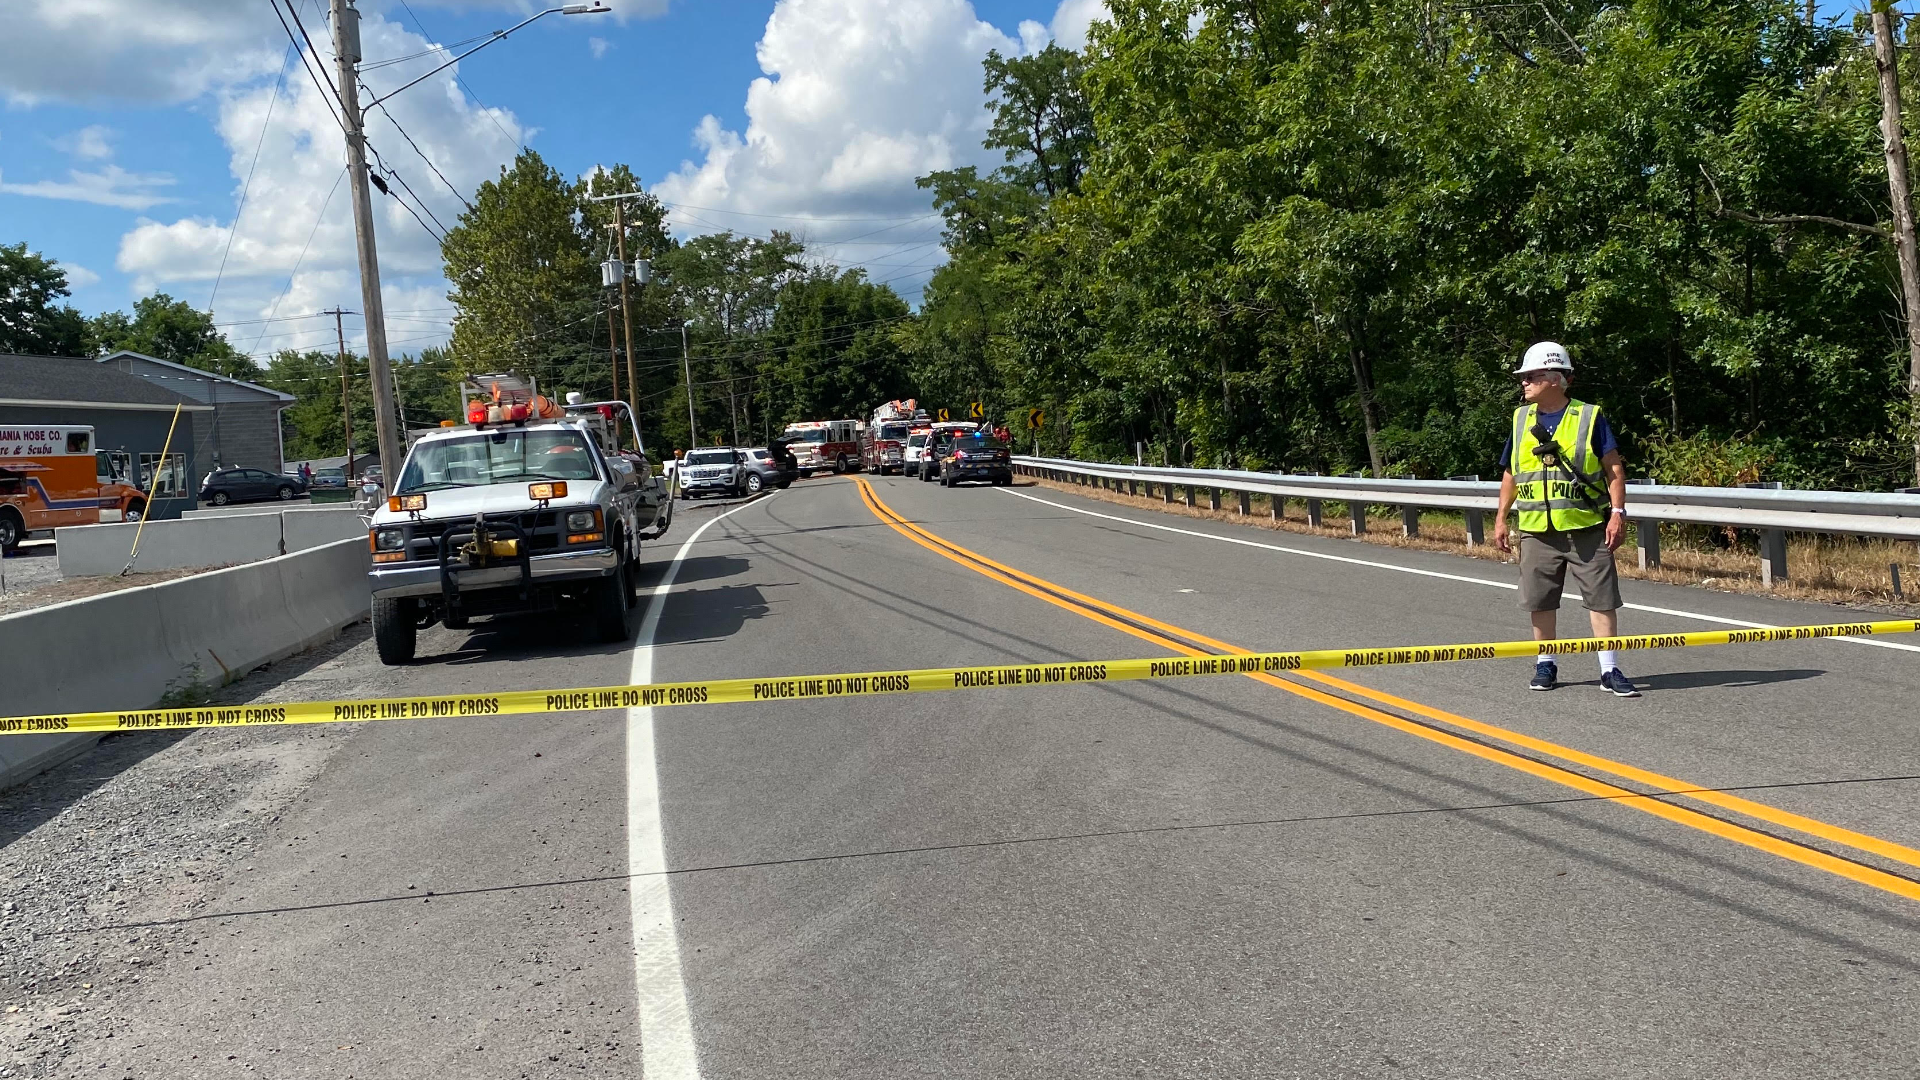 Autopsy unable to determine cause of death for the man found near the Lackawanna River over the weekend.